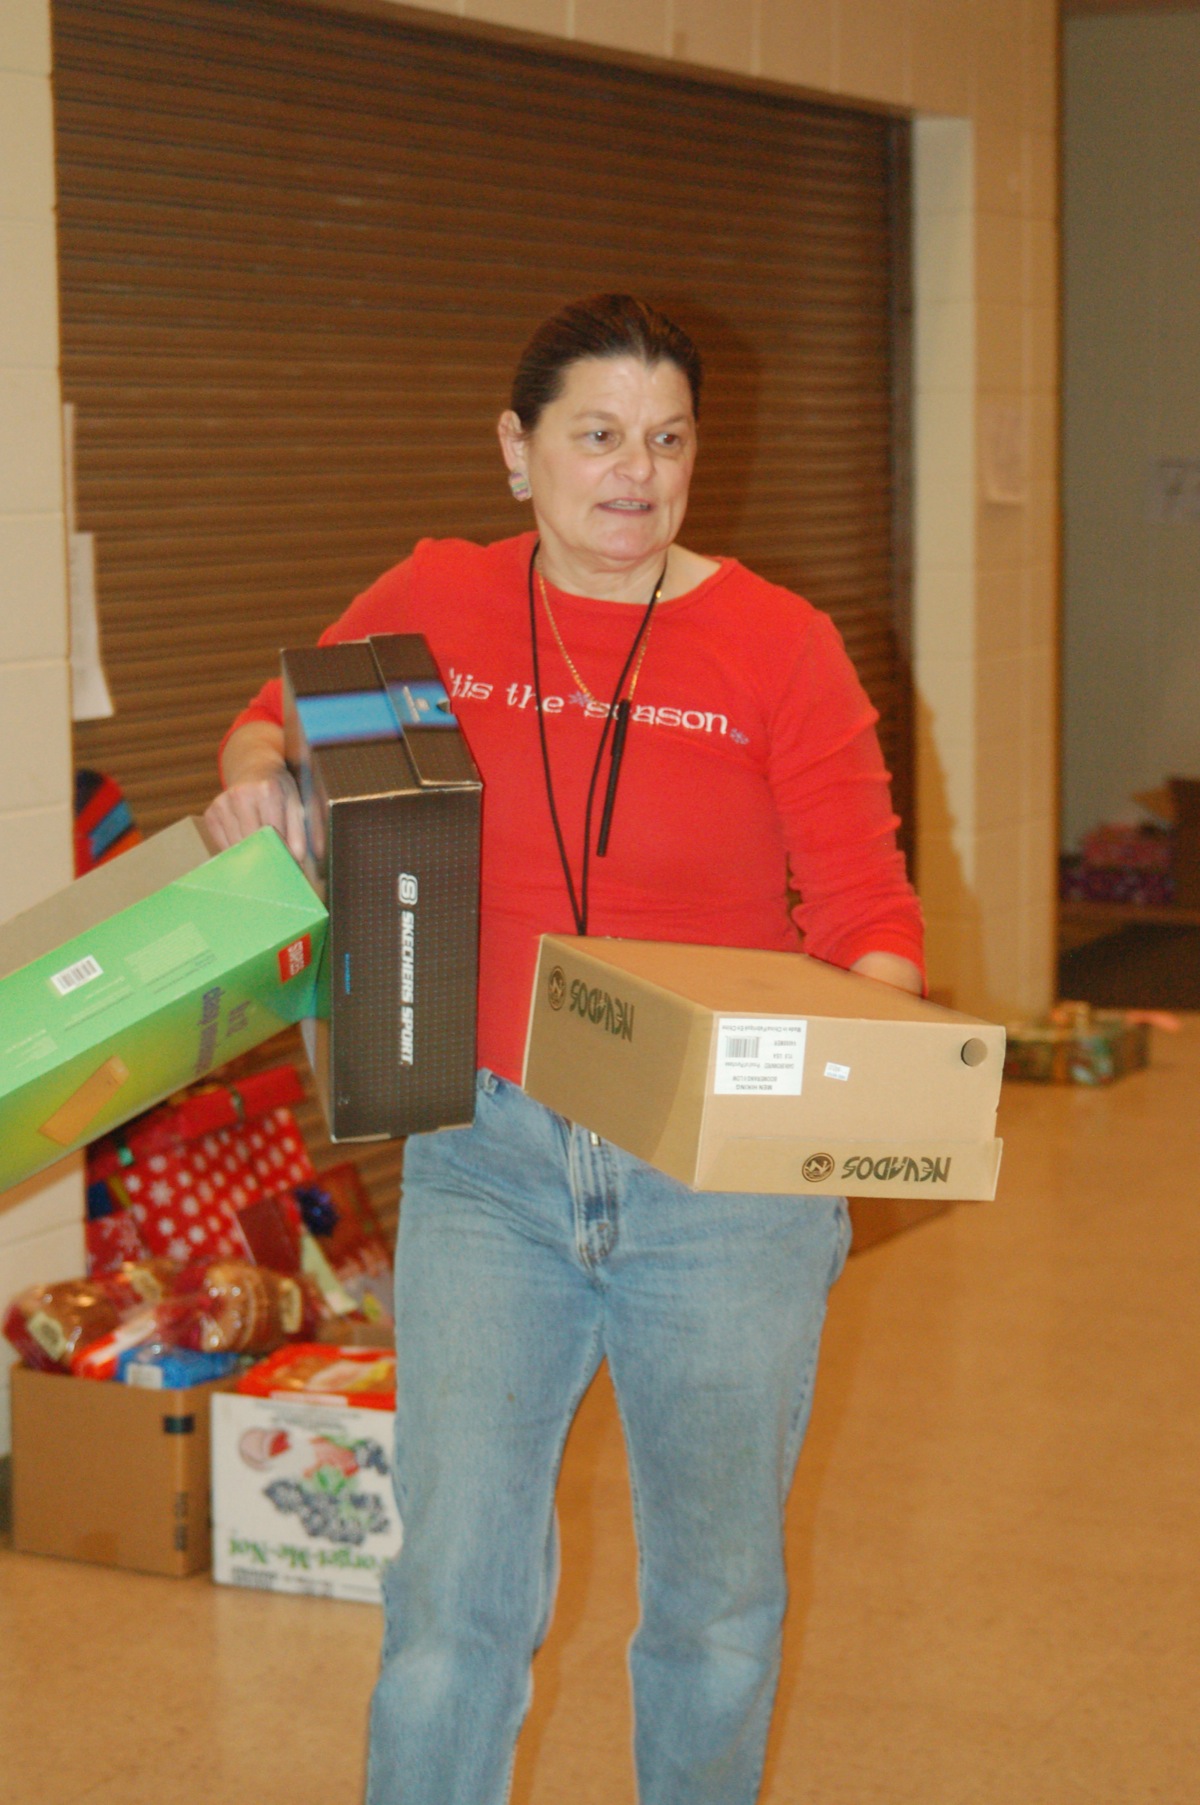 Share the Spirit co-coordinator Shari Daugherty carries boxes to be wrapped at the Share the Spirit food basket preparation and gift wrapping event on Friday at Homer High School.